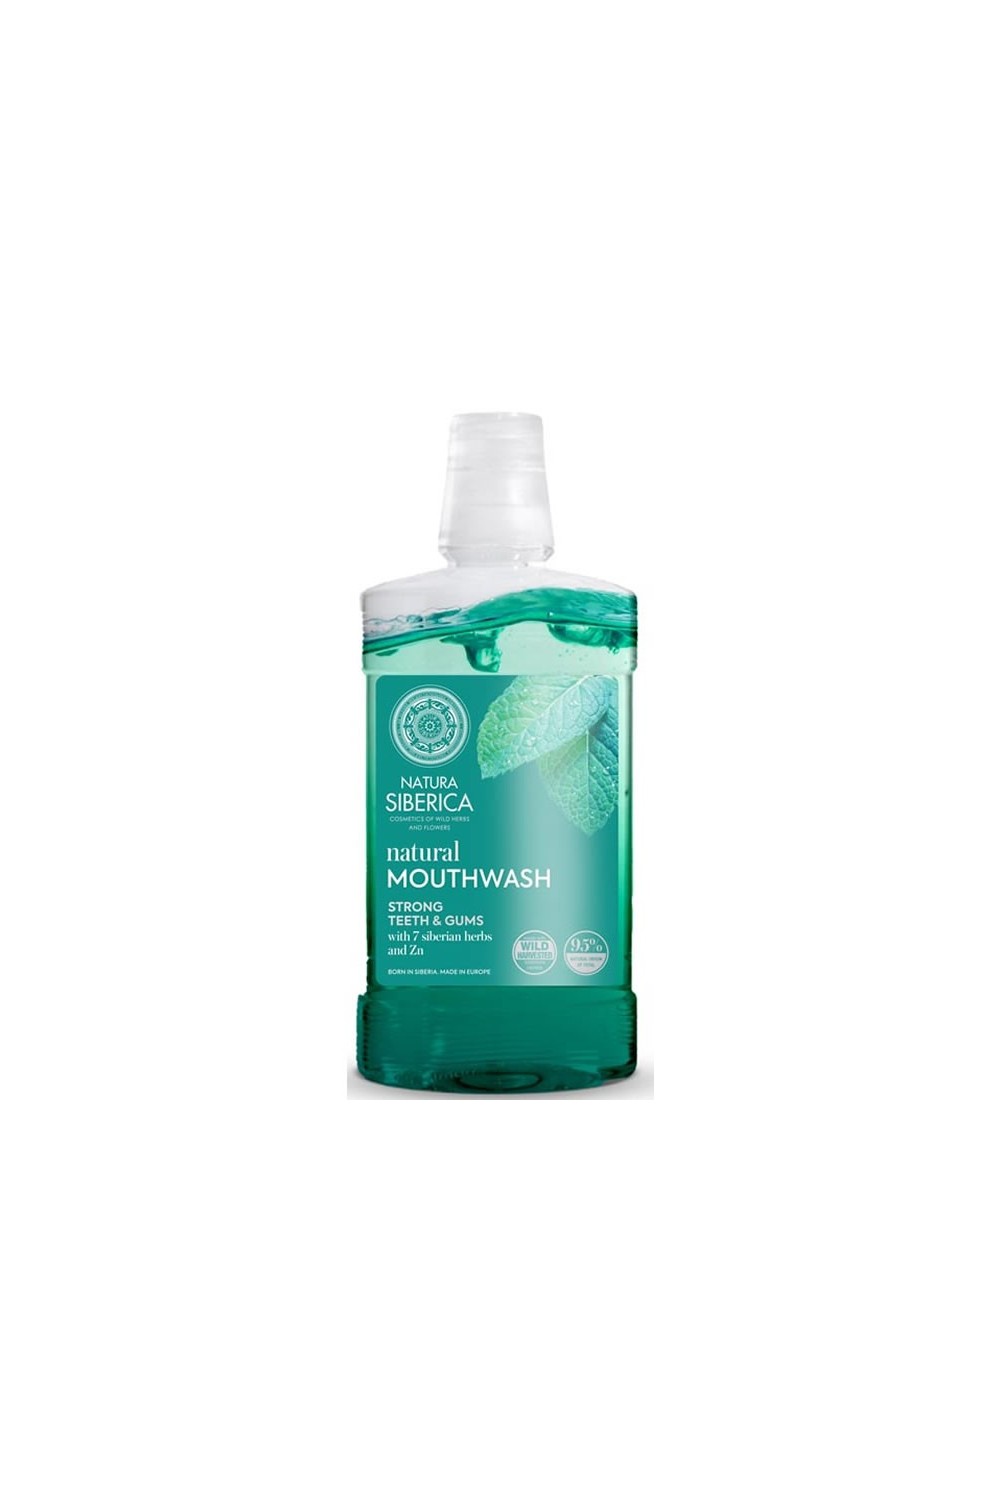 Natura Siberica Mouthwash With 7 Siberian Herbs And Zn 520ml